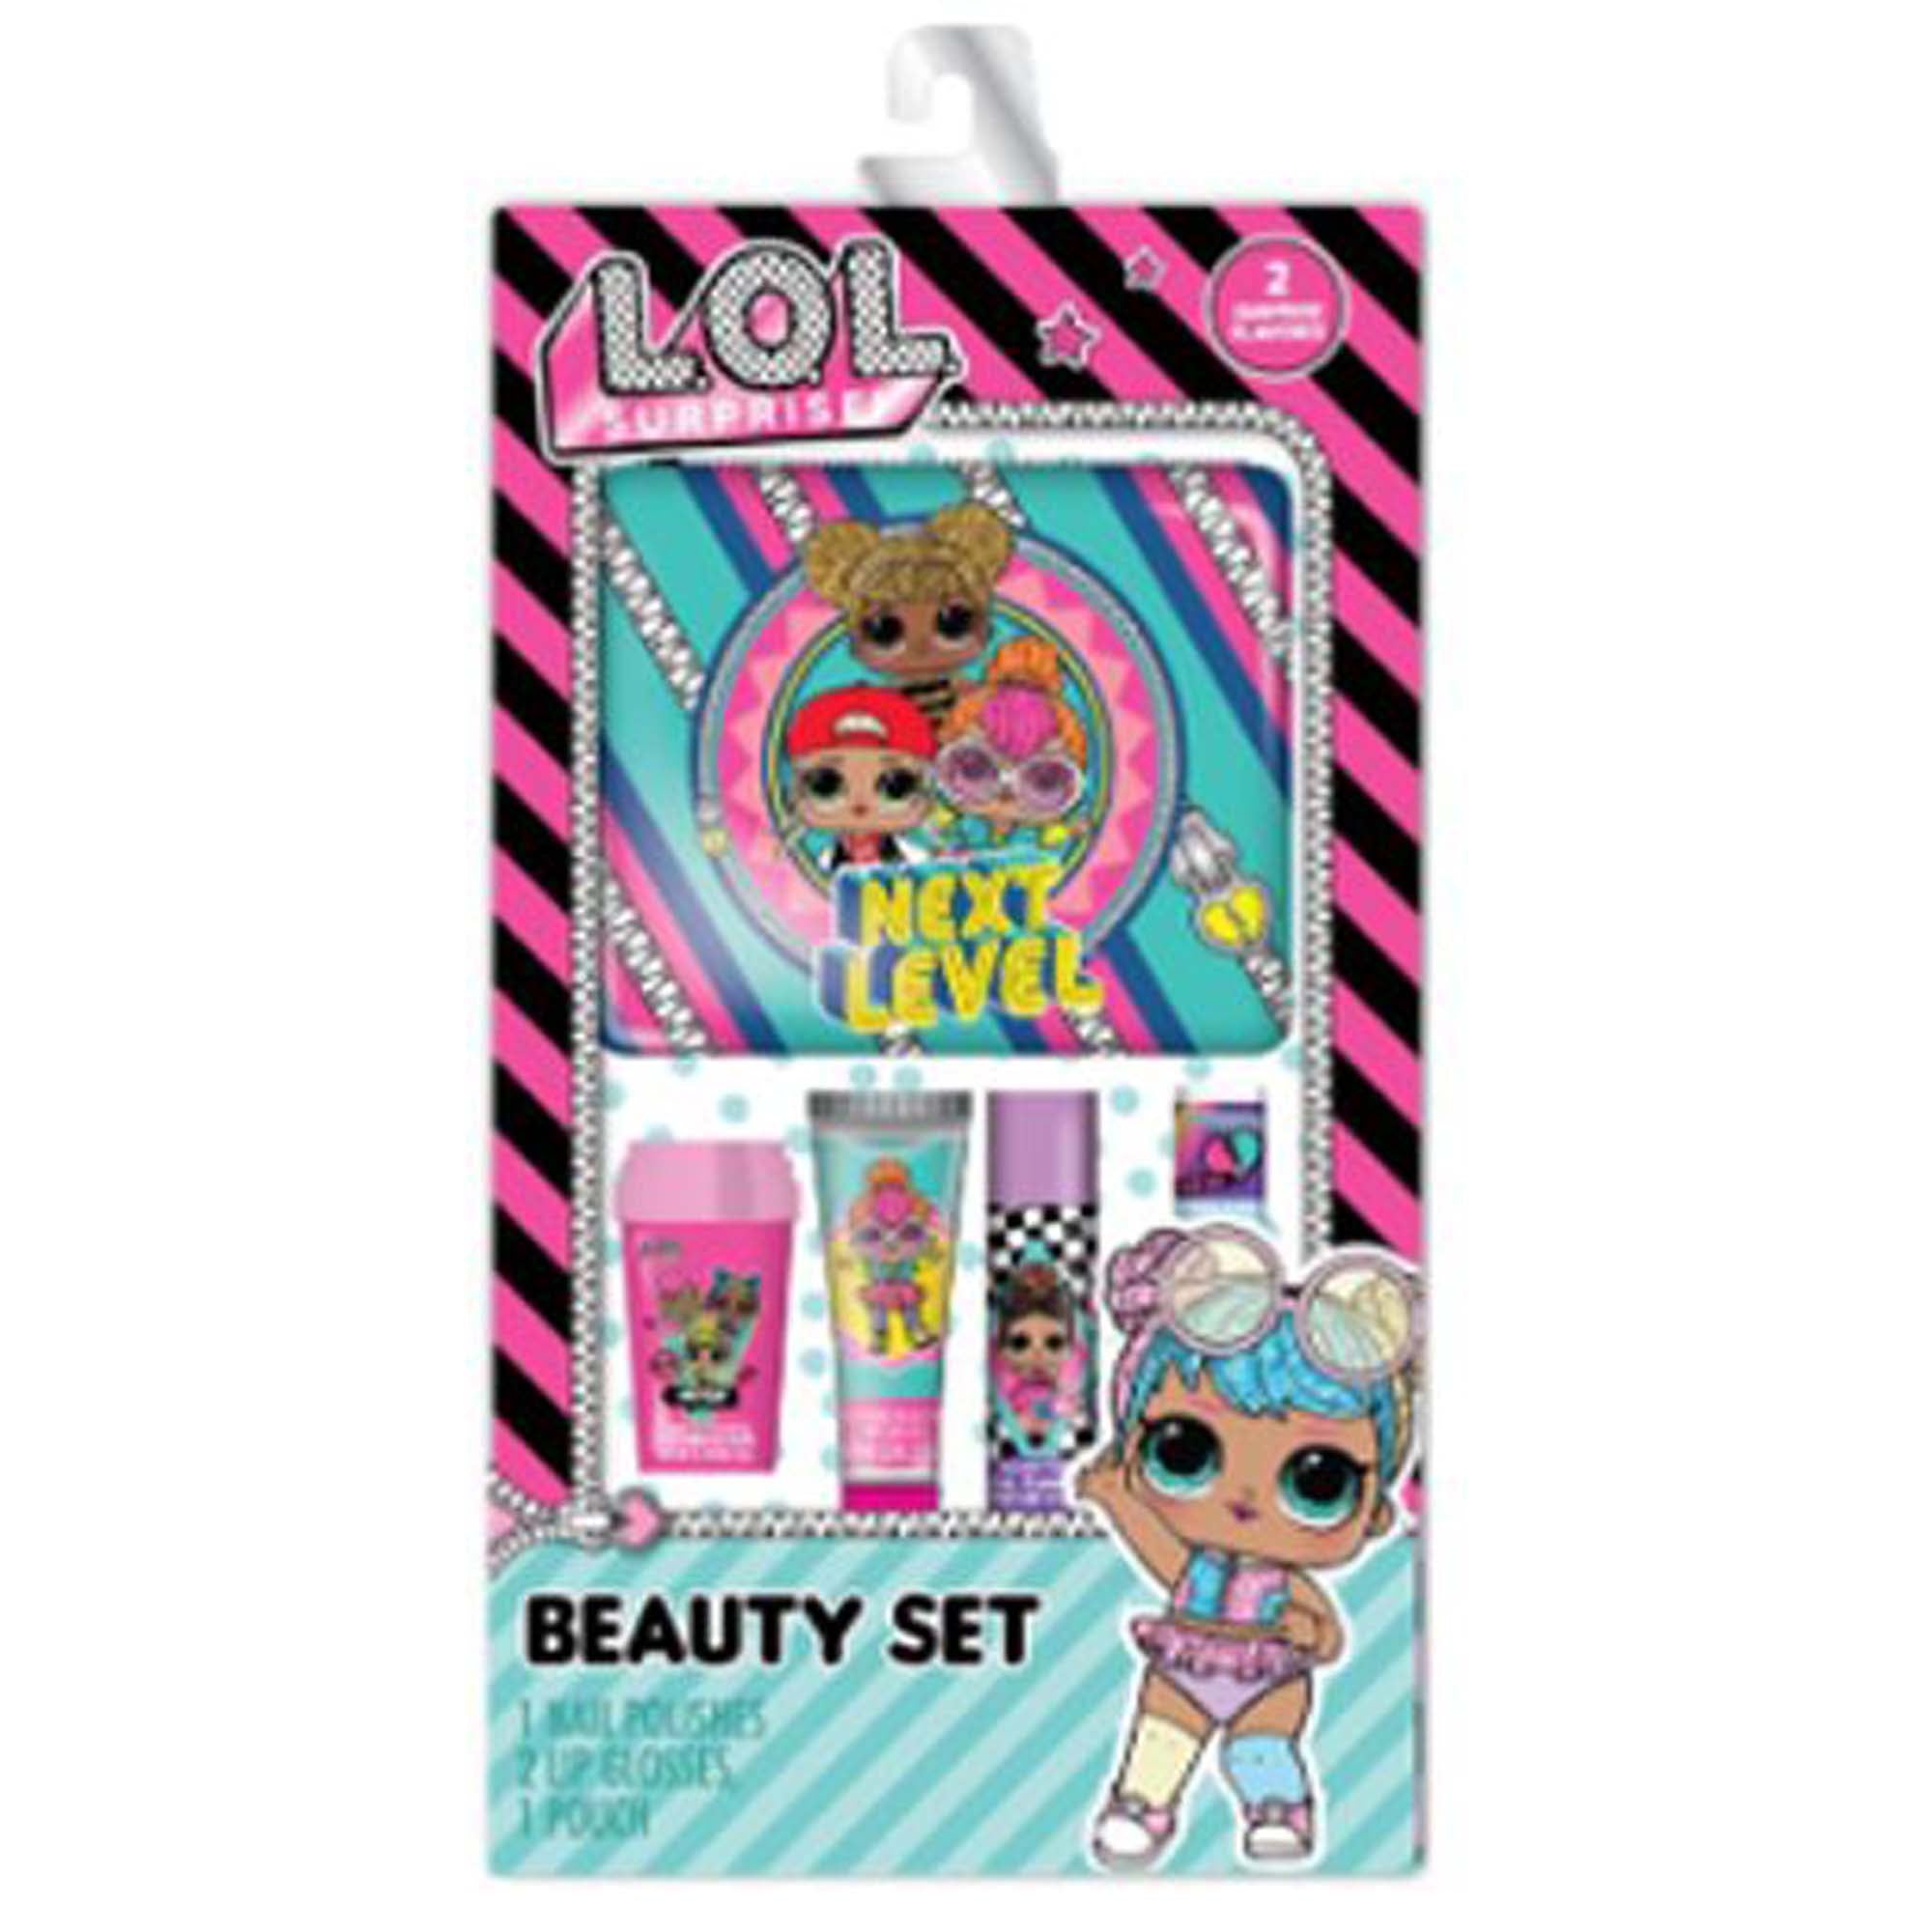 LOL Surprise Beauty Set with Pouch, 1 Count